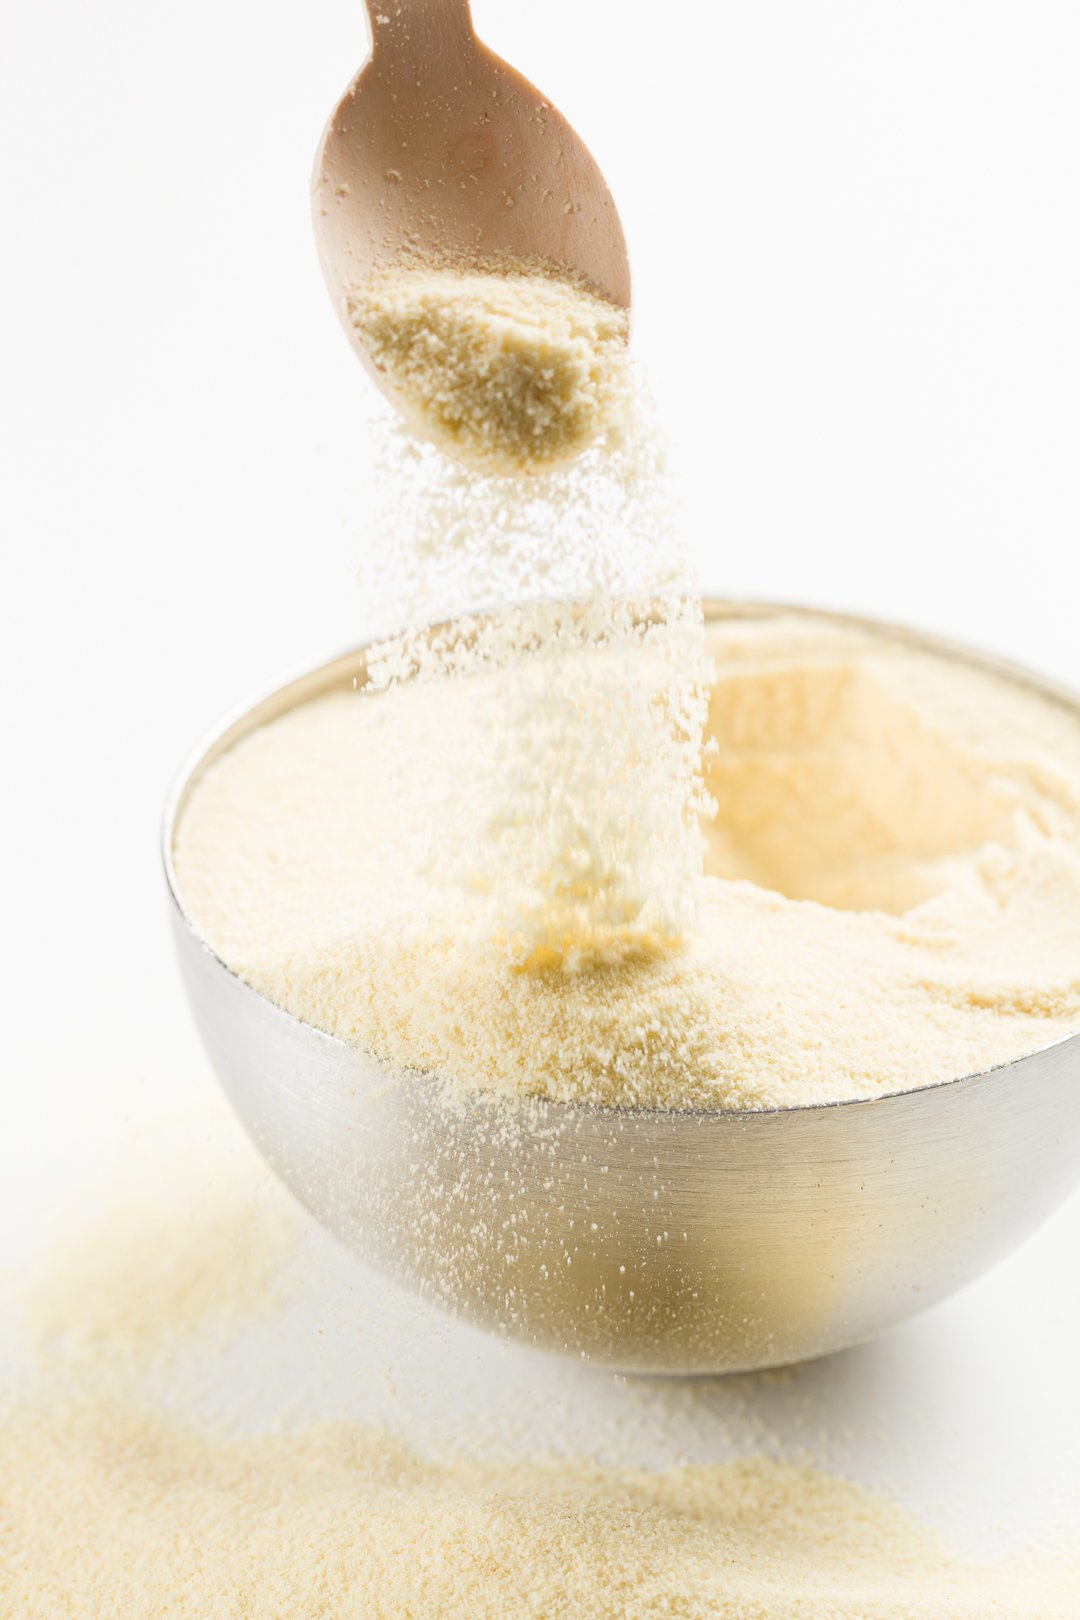 semolina flour pouring out of a spoon into a bowl